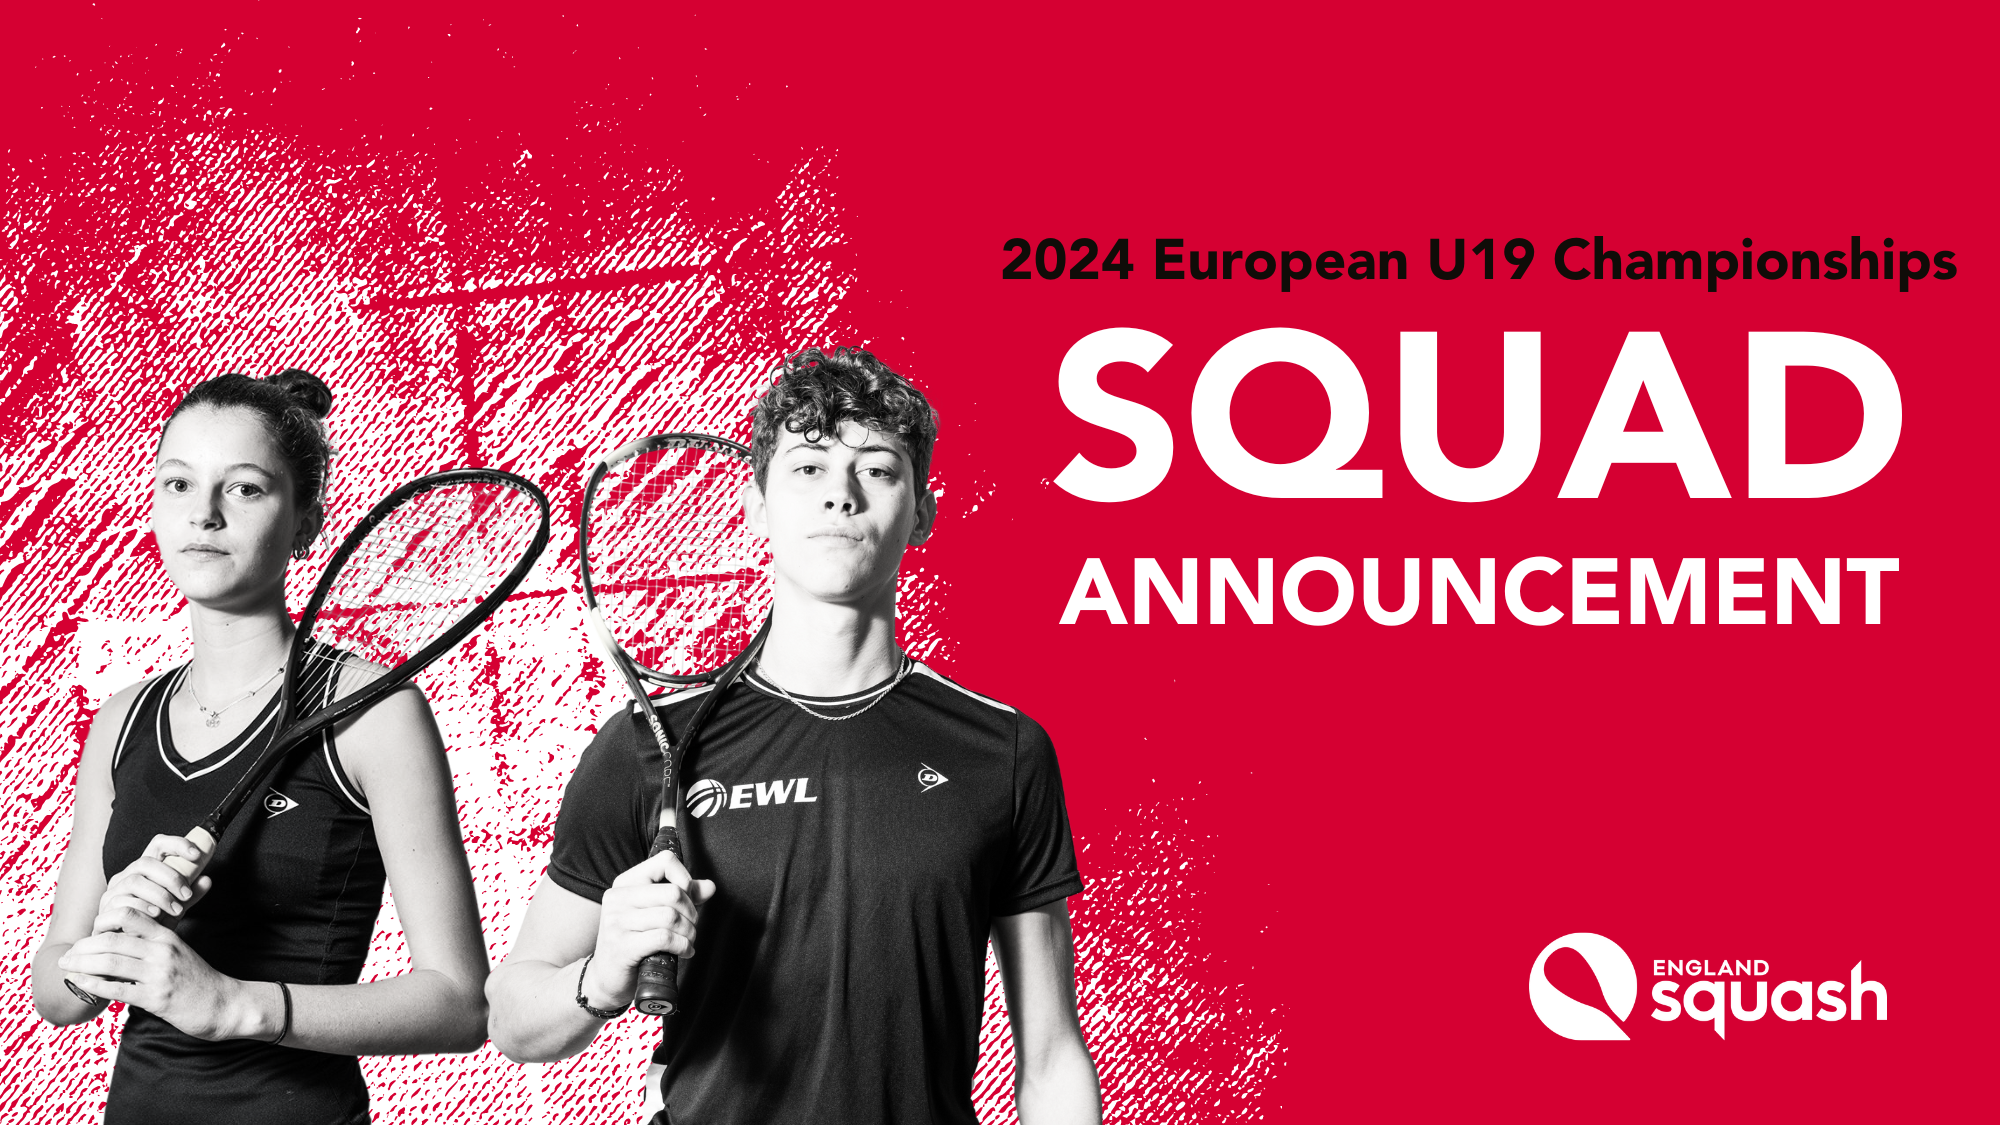 England Squash has announced its squad for the U19 European Championships.